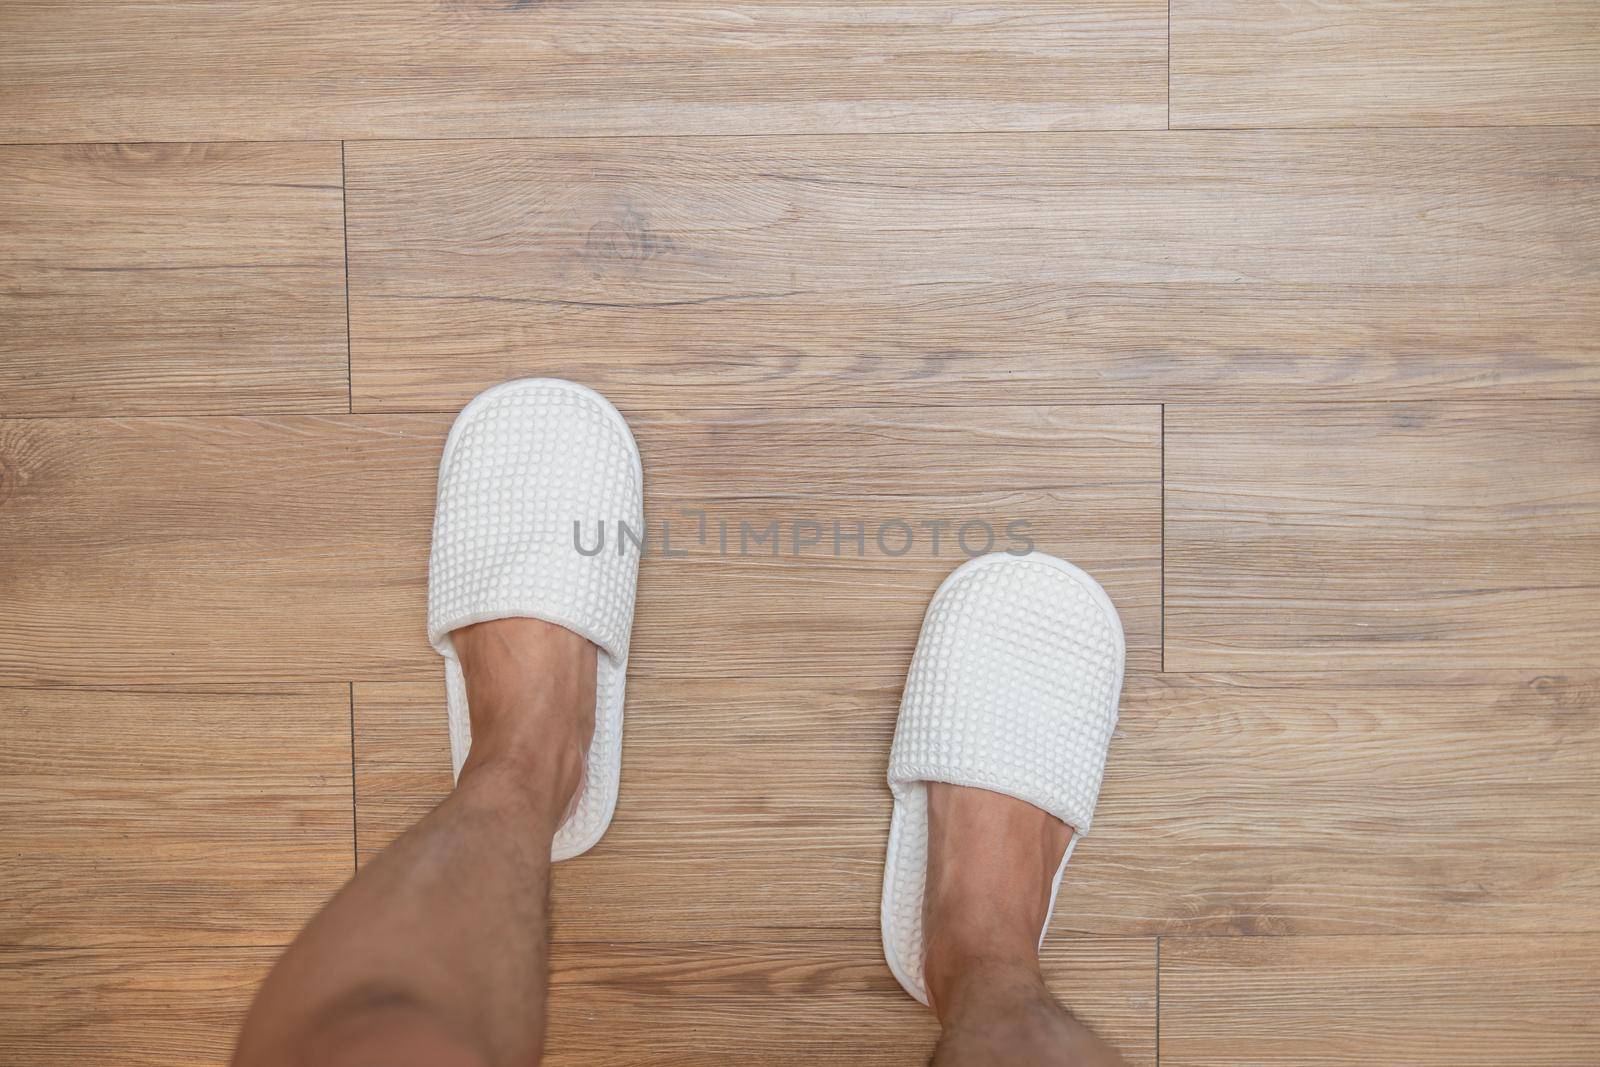 Slippers on man legs . Feet wearing white house slippers stand on brown wood floor.